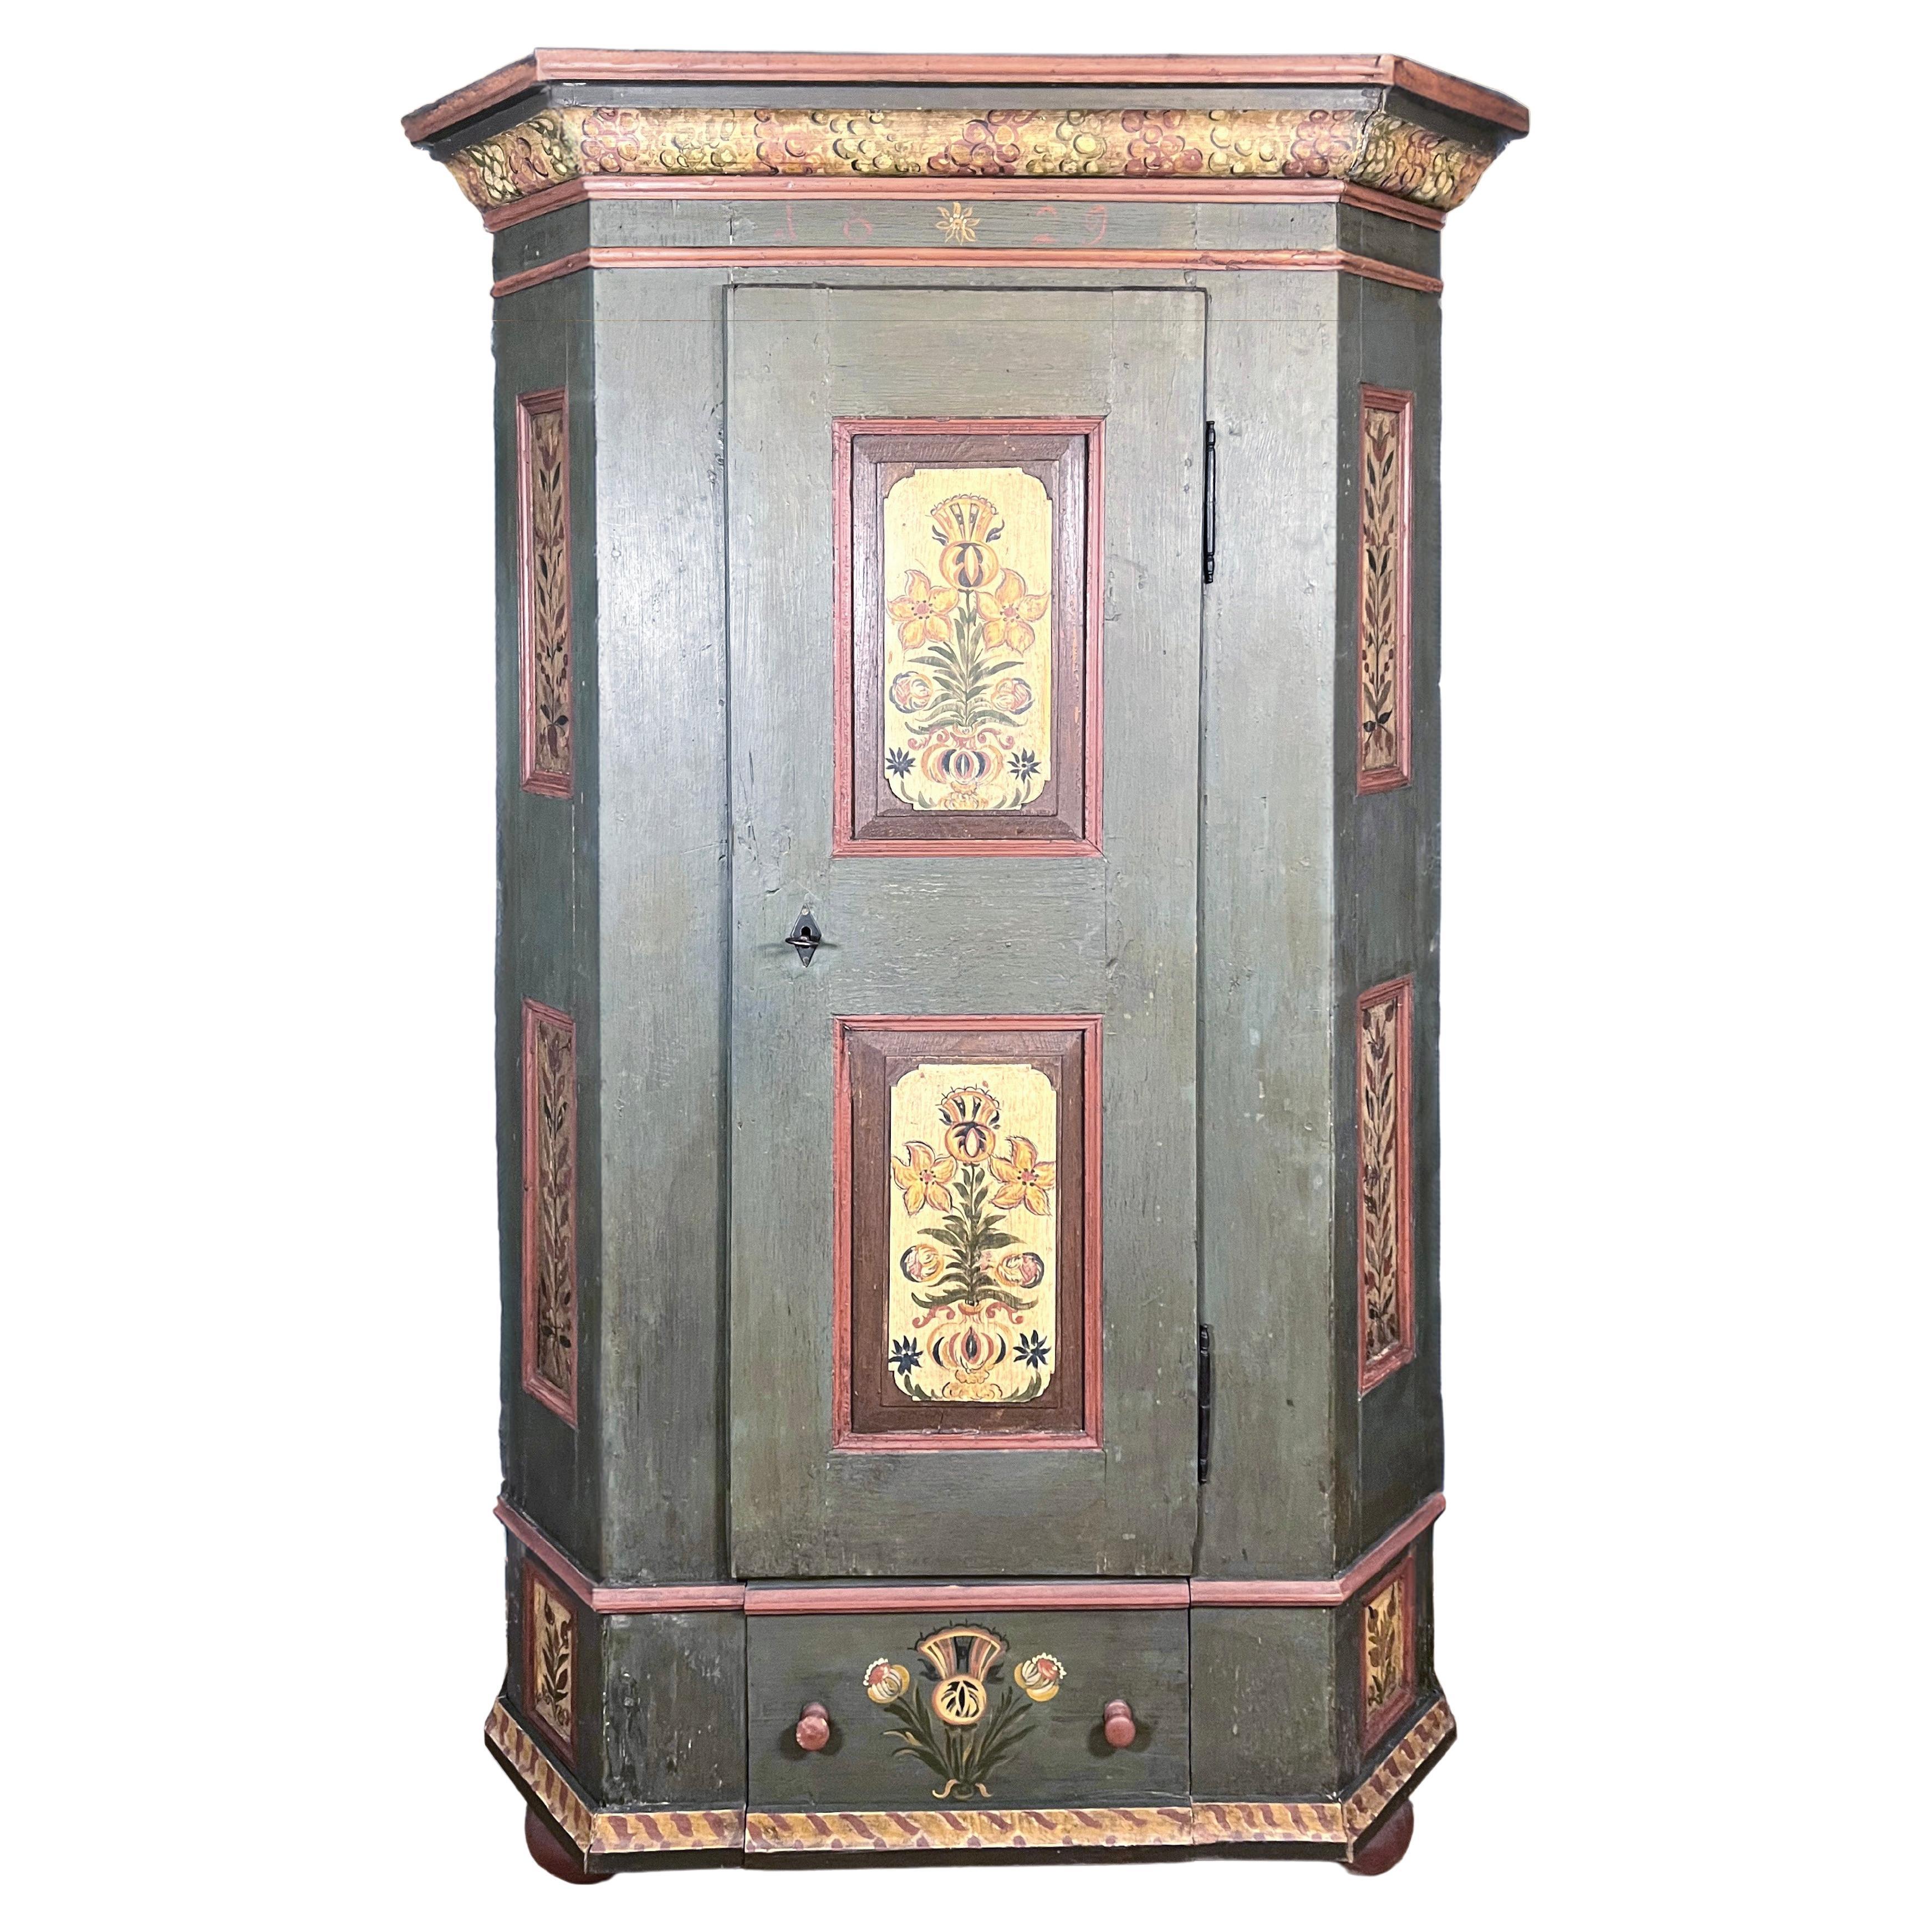 Austrian Hand Painted Armoire